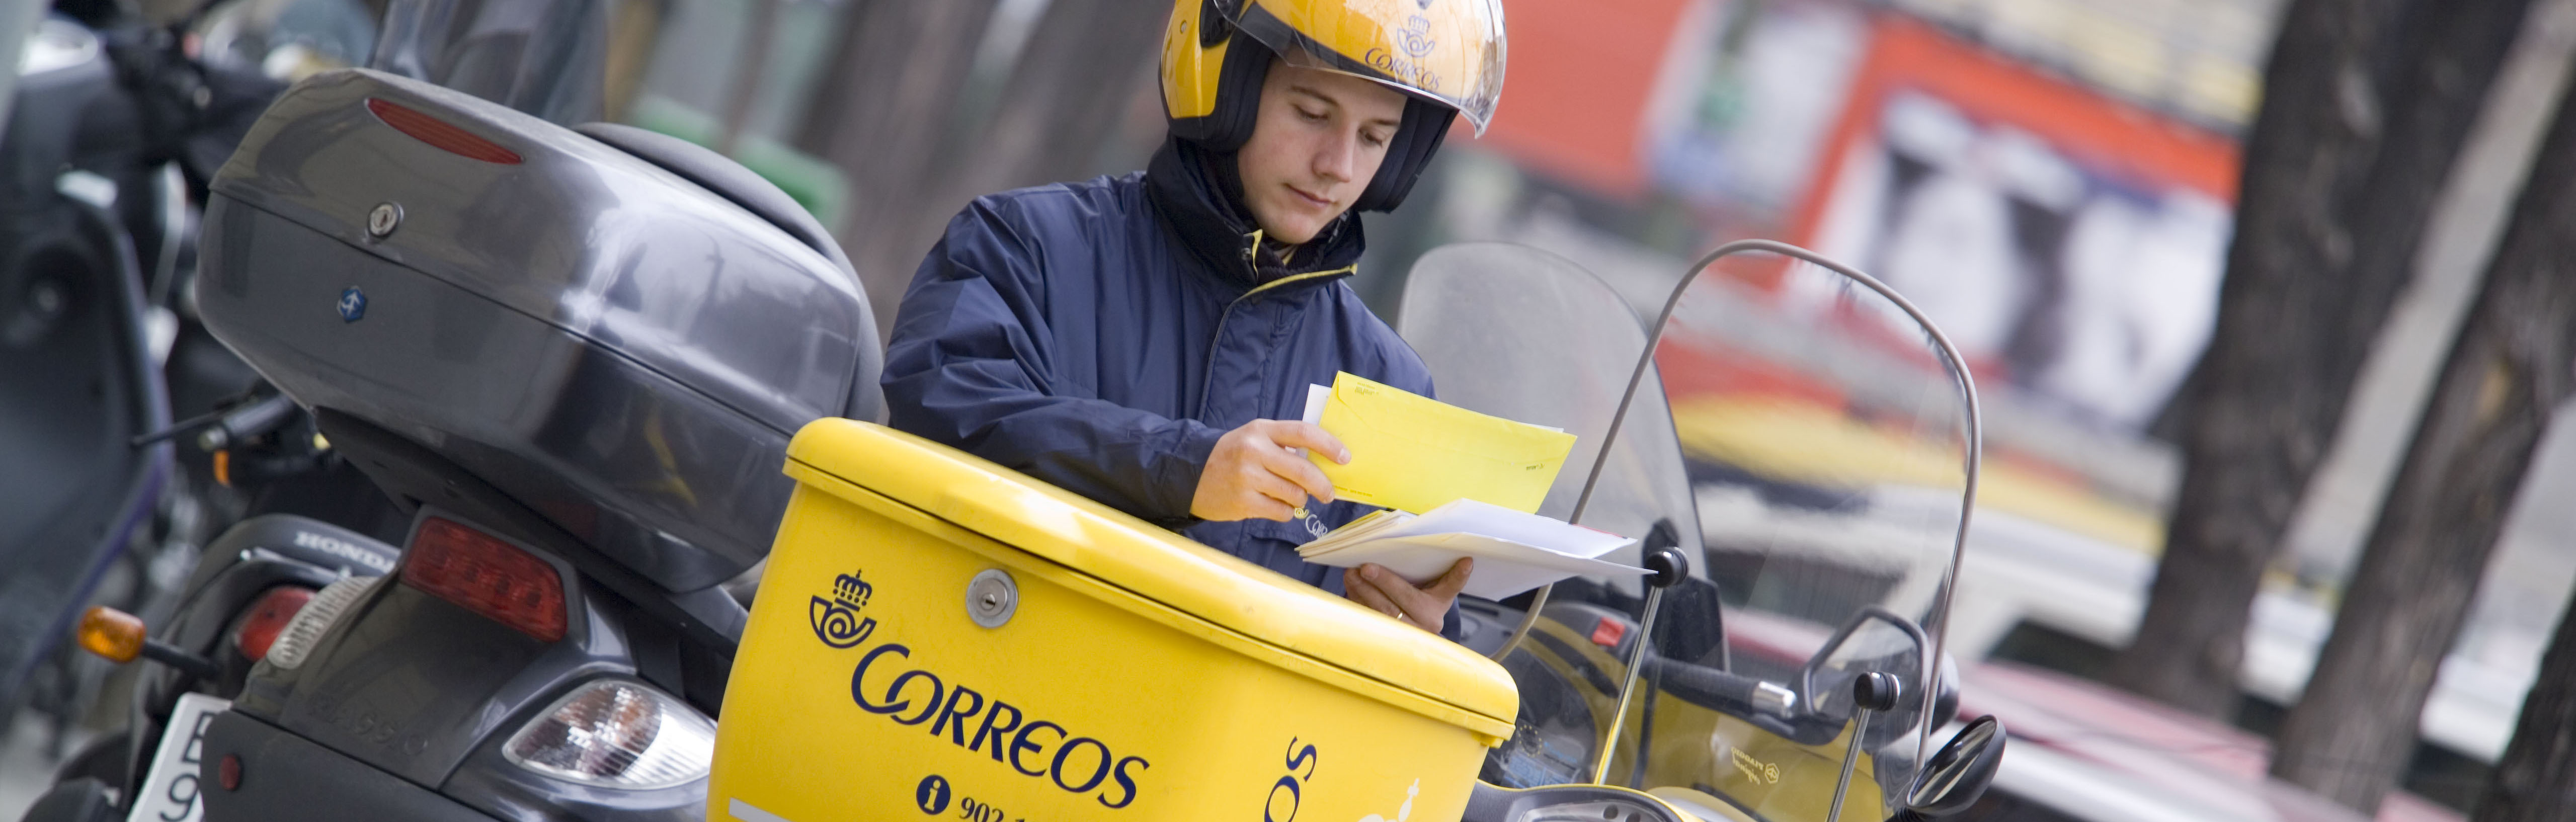 CORREOS begins its international expansion in the Iberian Peninsula and Southeast Asia 